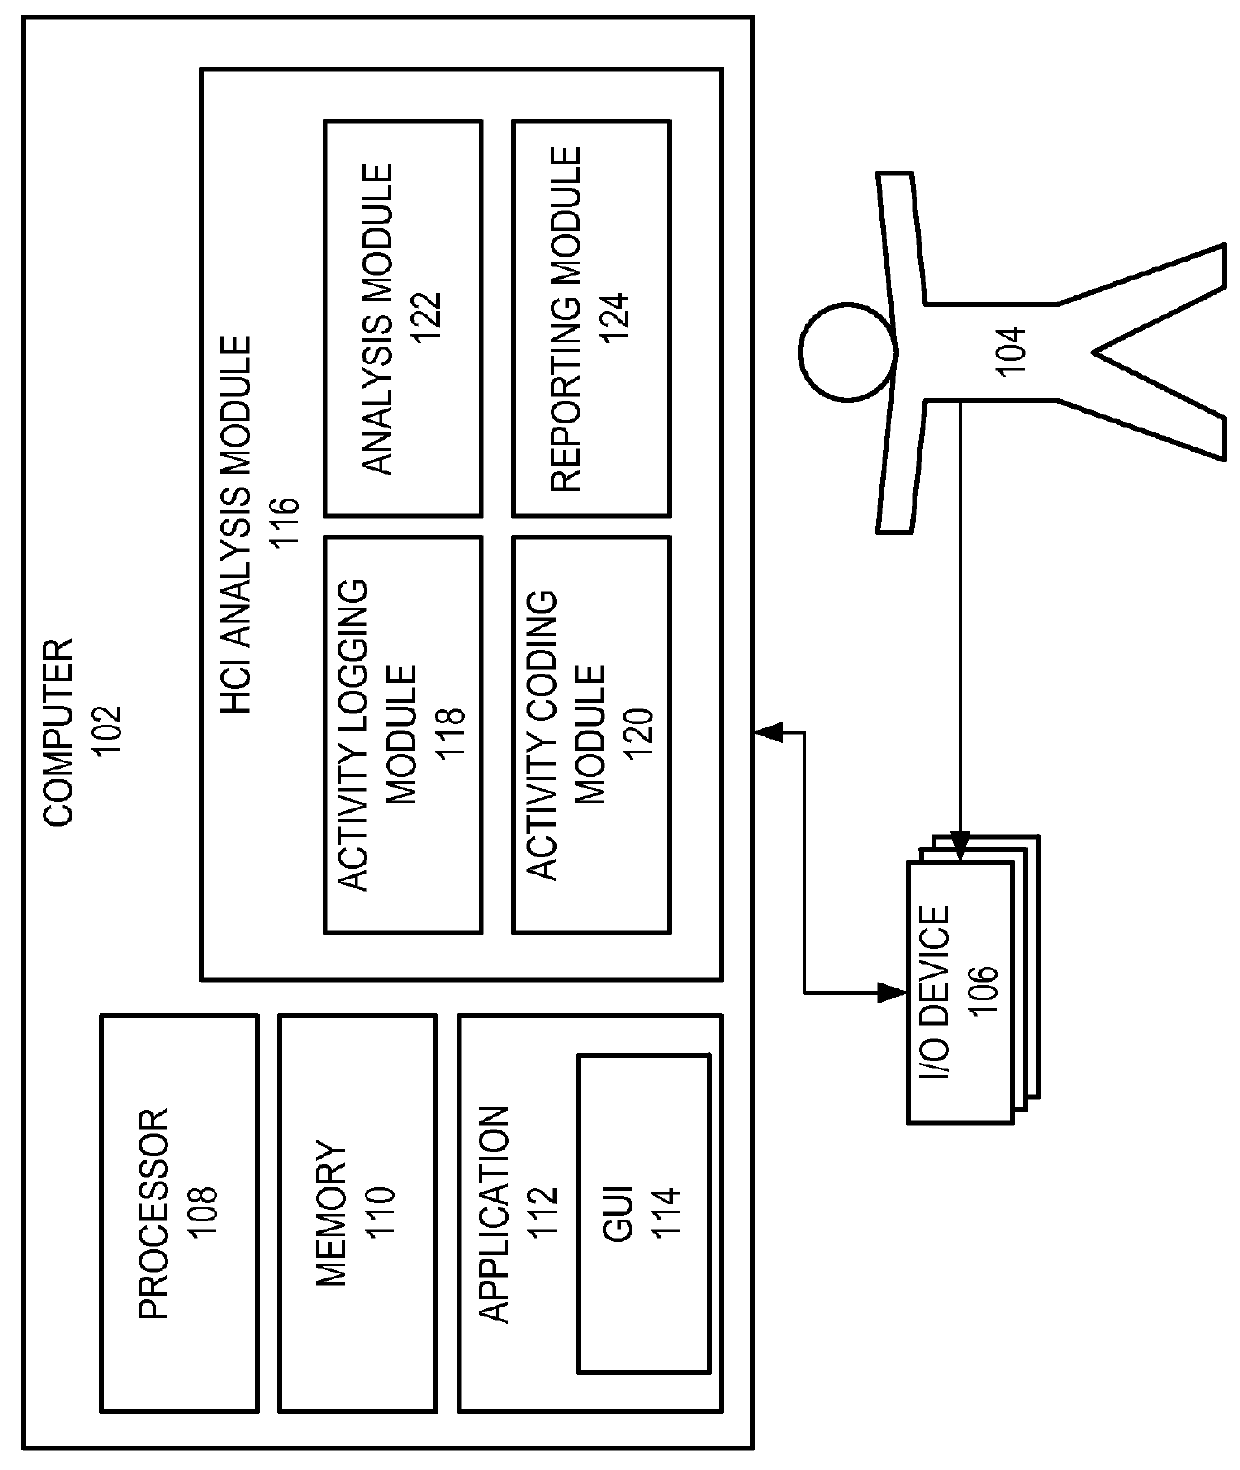 Method for inferring standardized human-computer interface usage strategies from software instrumentation and dynamic probabilistic modeling